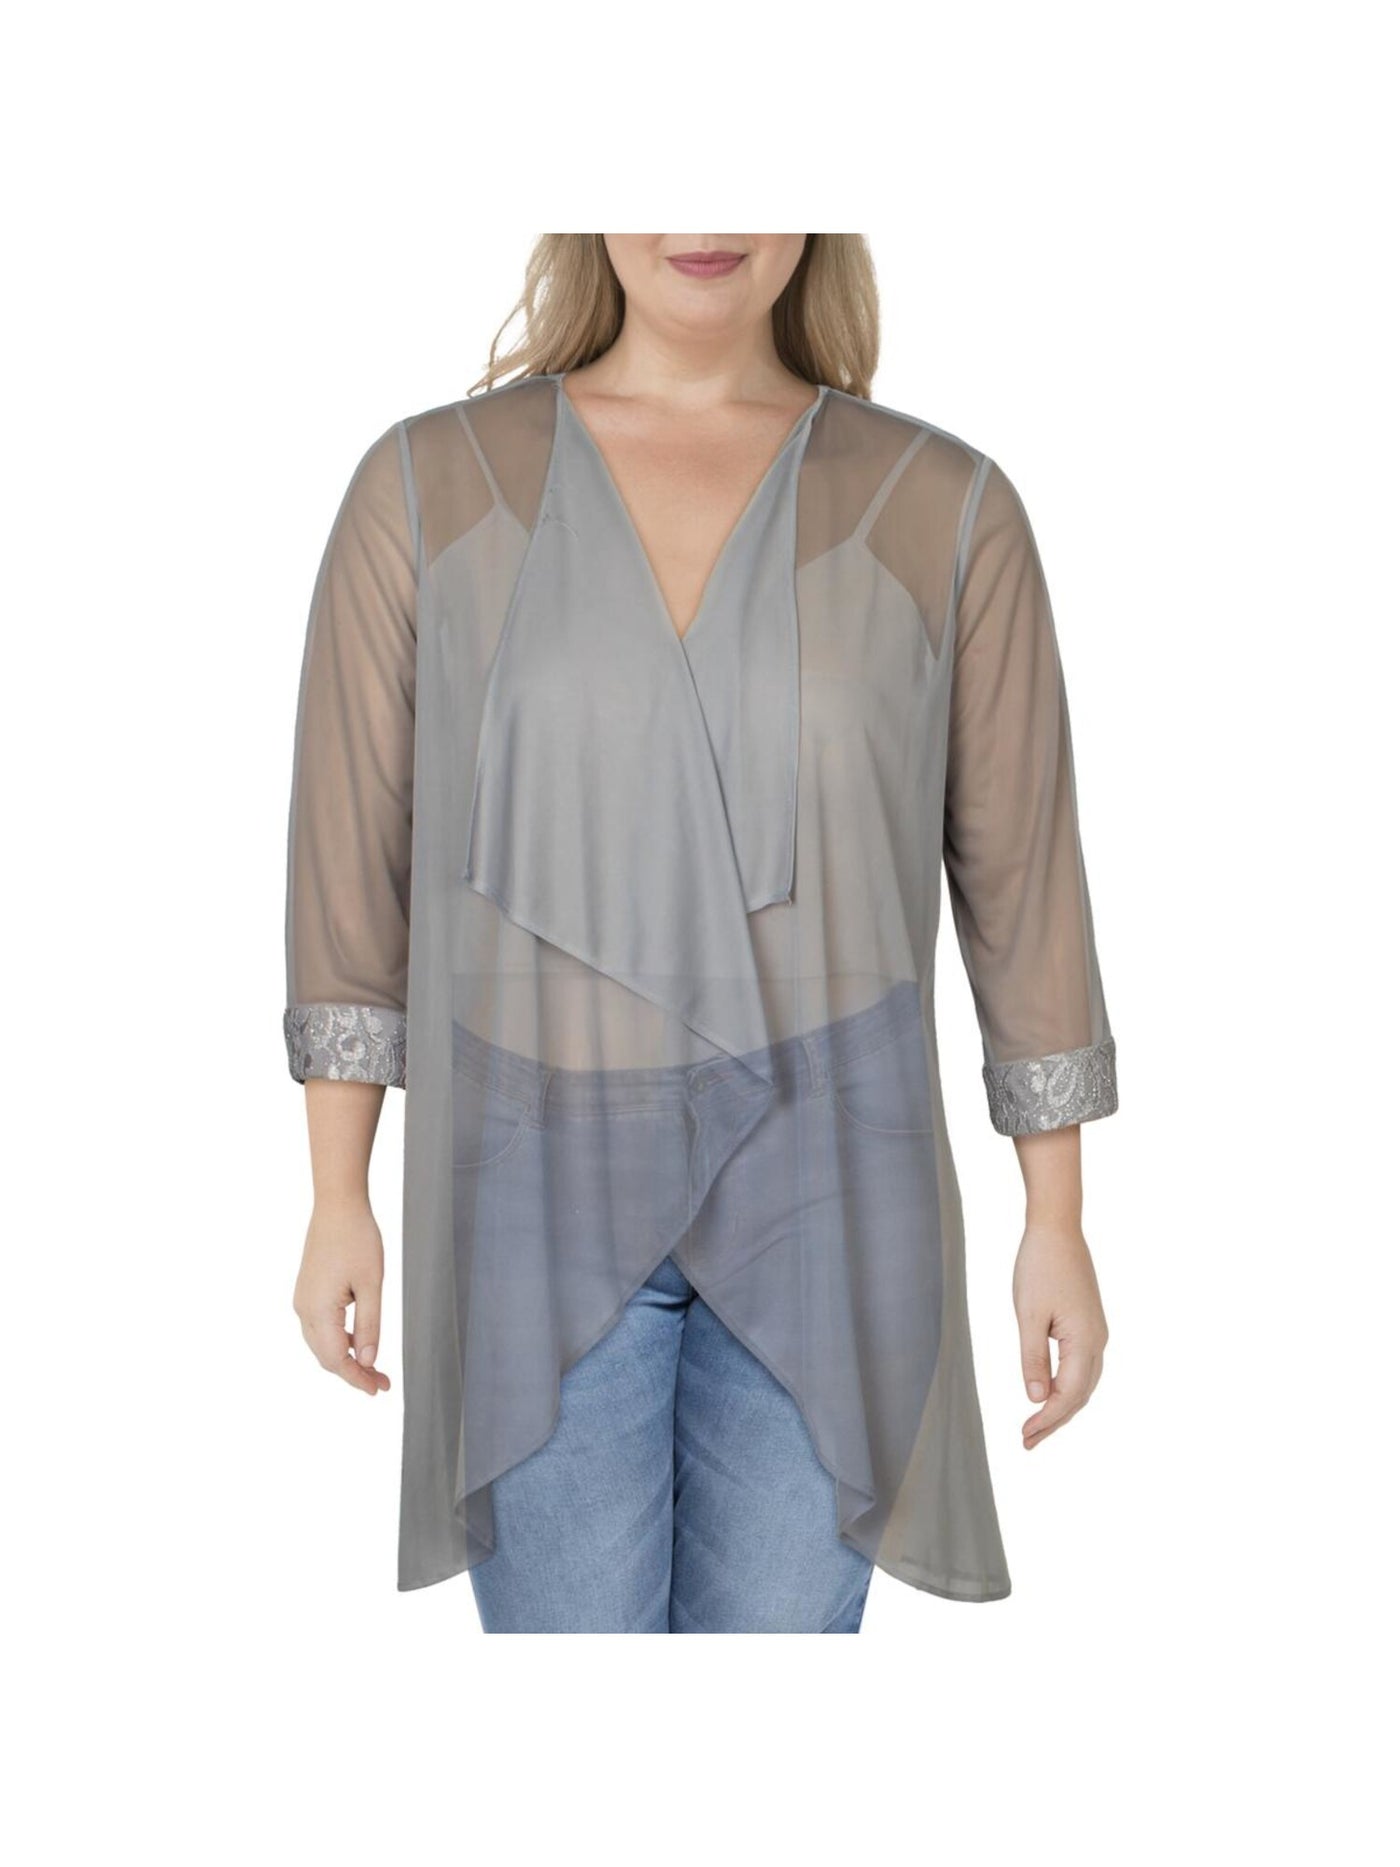 R&M RICHARDS Womens Silver Sheer Embellished Collarless Draped Open Front 3/4 Sleeve Jacket 10